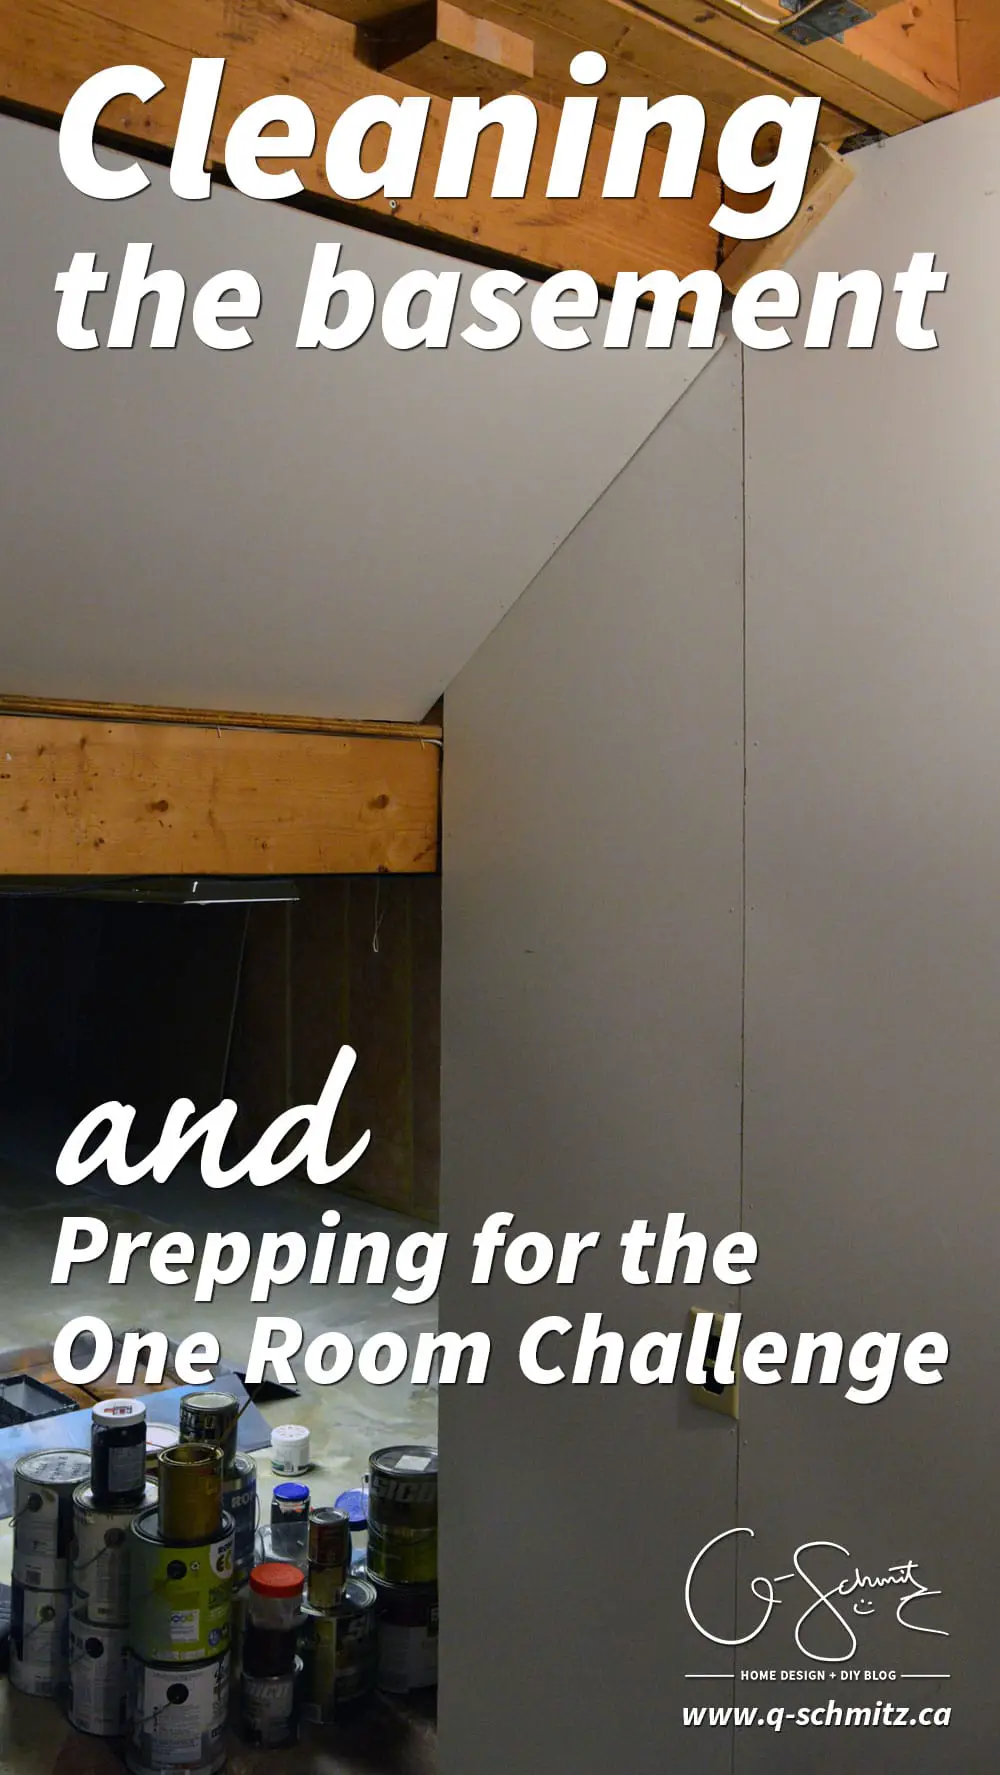 Cleaning the basement and prepping for ORC (one room challenge) has got me excited to share with you all the plans I have for the space (next week!).